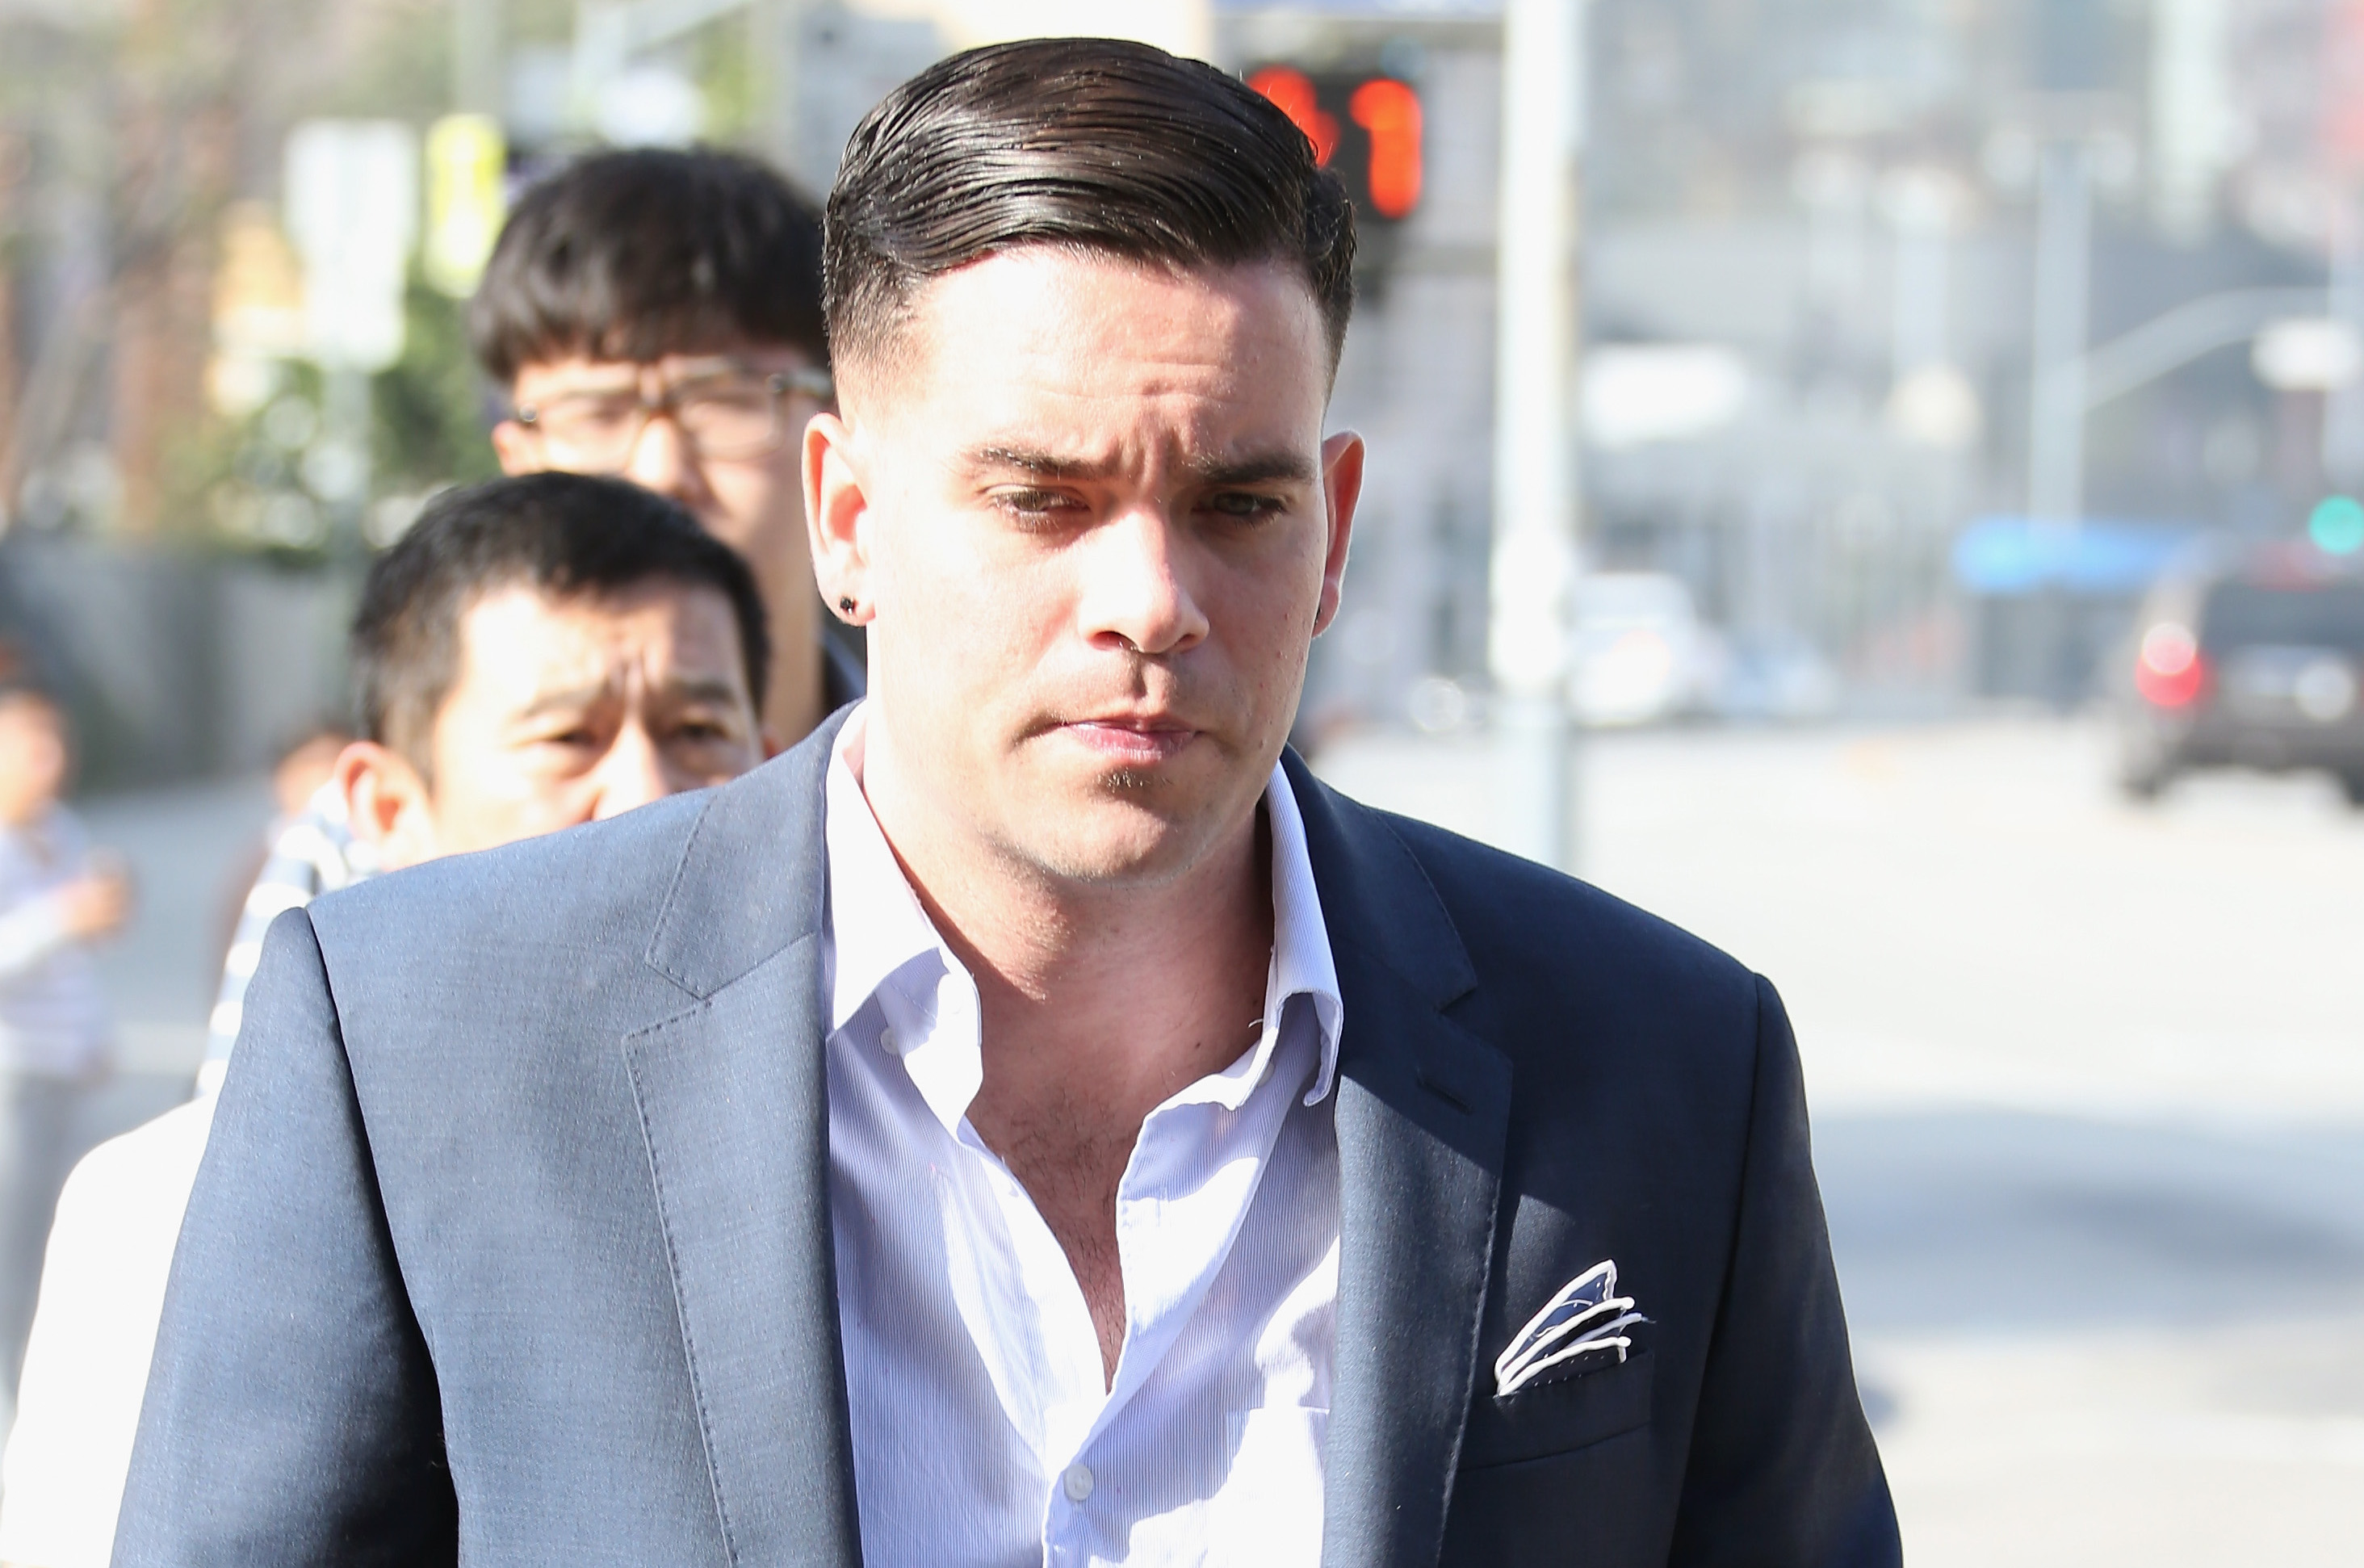 Daughter Underground Porn - Mark Salling faces up to 7 years in prison for child porn ...